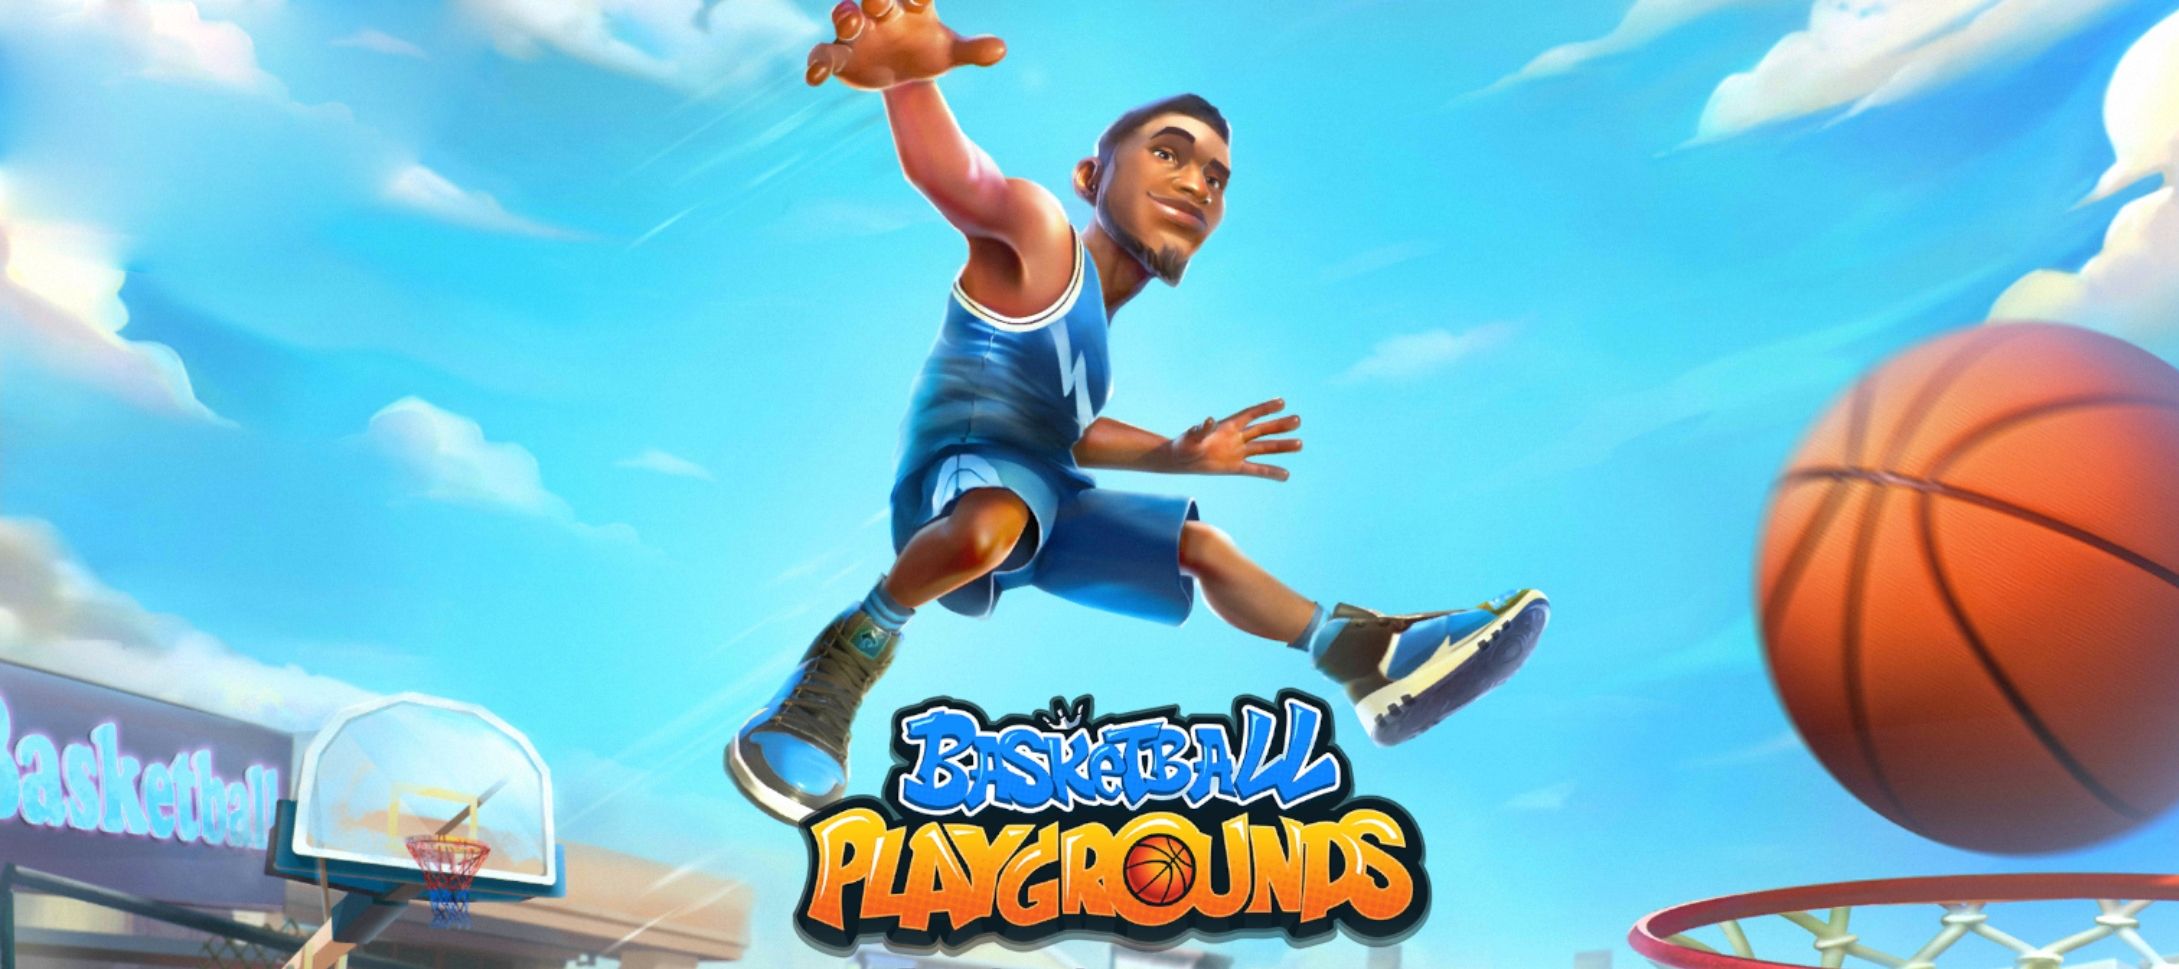 Basketball Playgrounds early access release hero